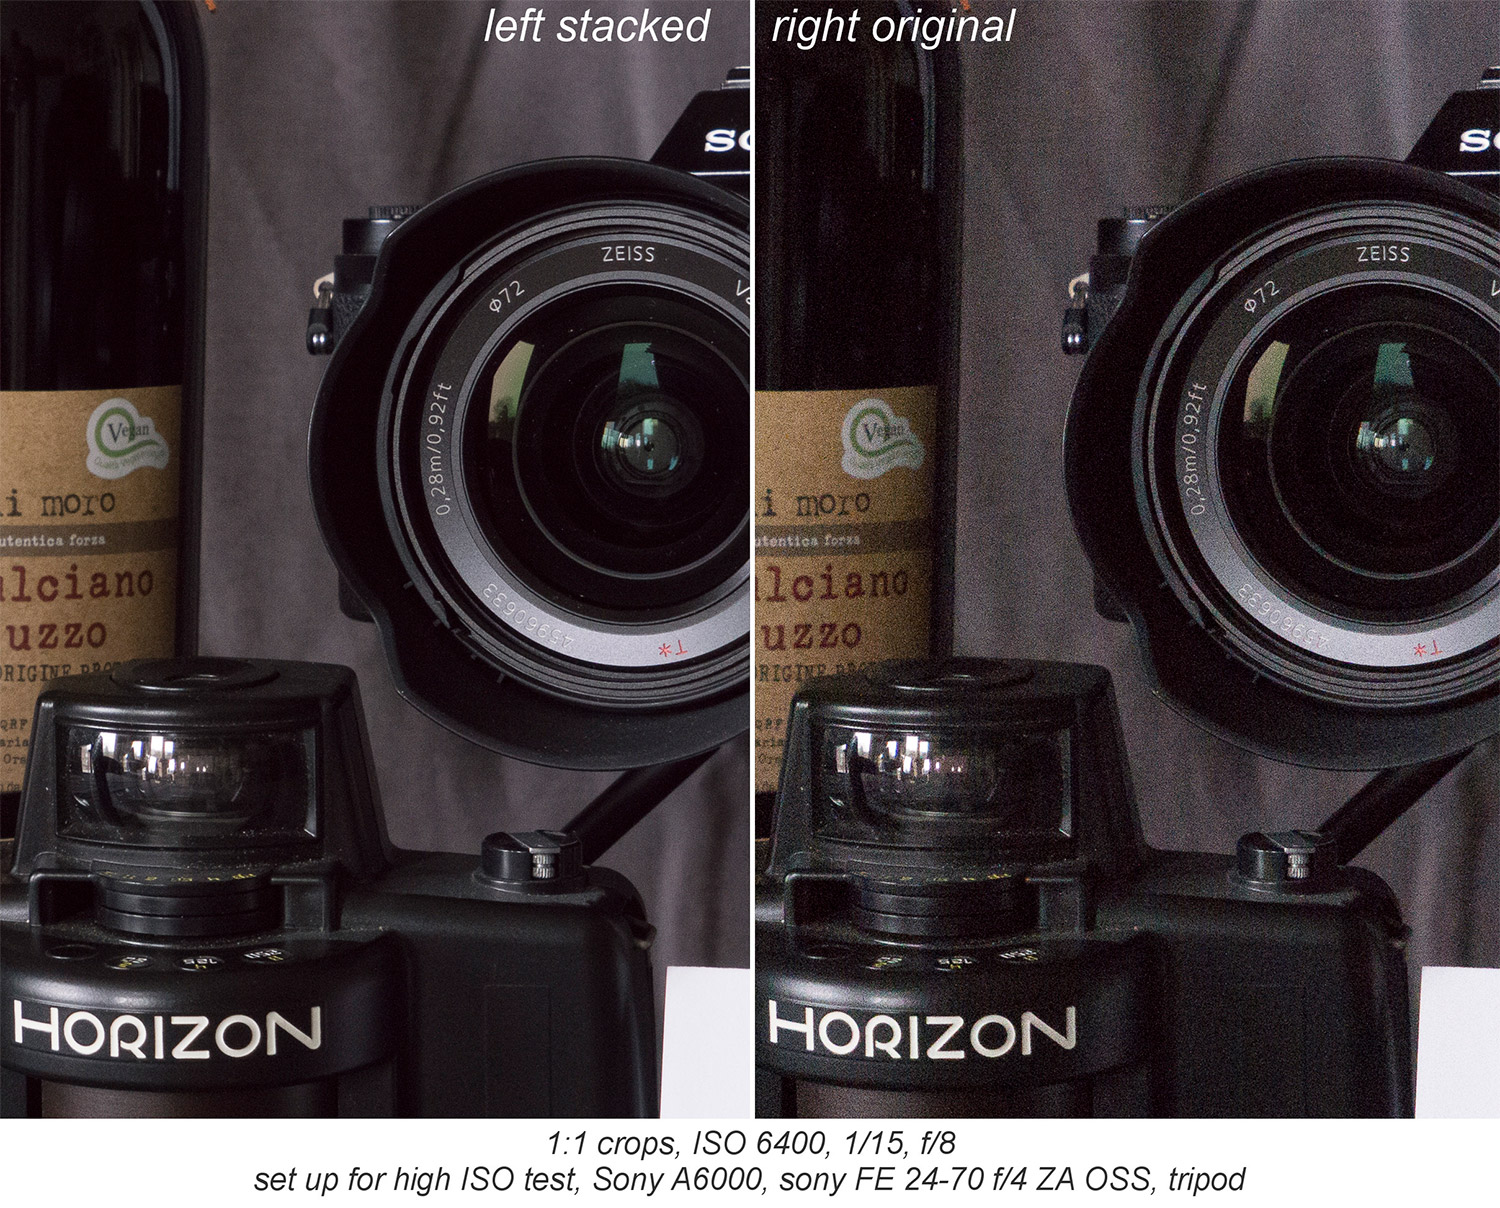 Sony A7rII: Shooting very high ISO and get clean images with